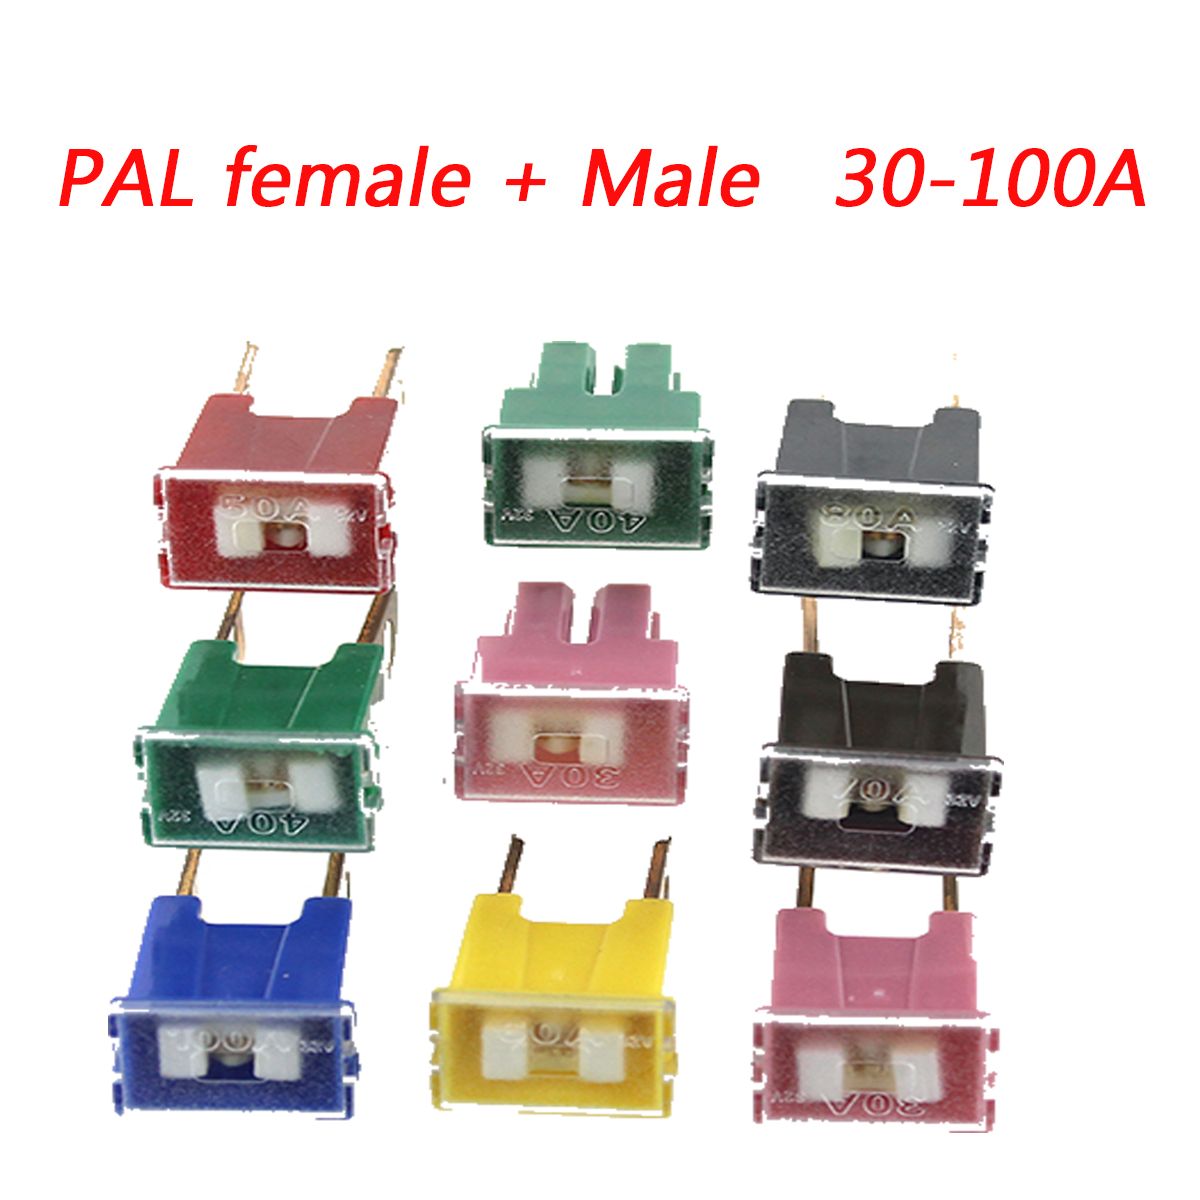 9Pcs-30-100A-ABSCopper-Auto-Male-Female-Fuse-7-Colors-PAL-Replacement-Accessories-1441595